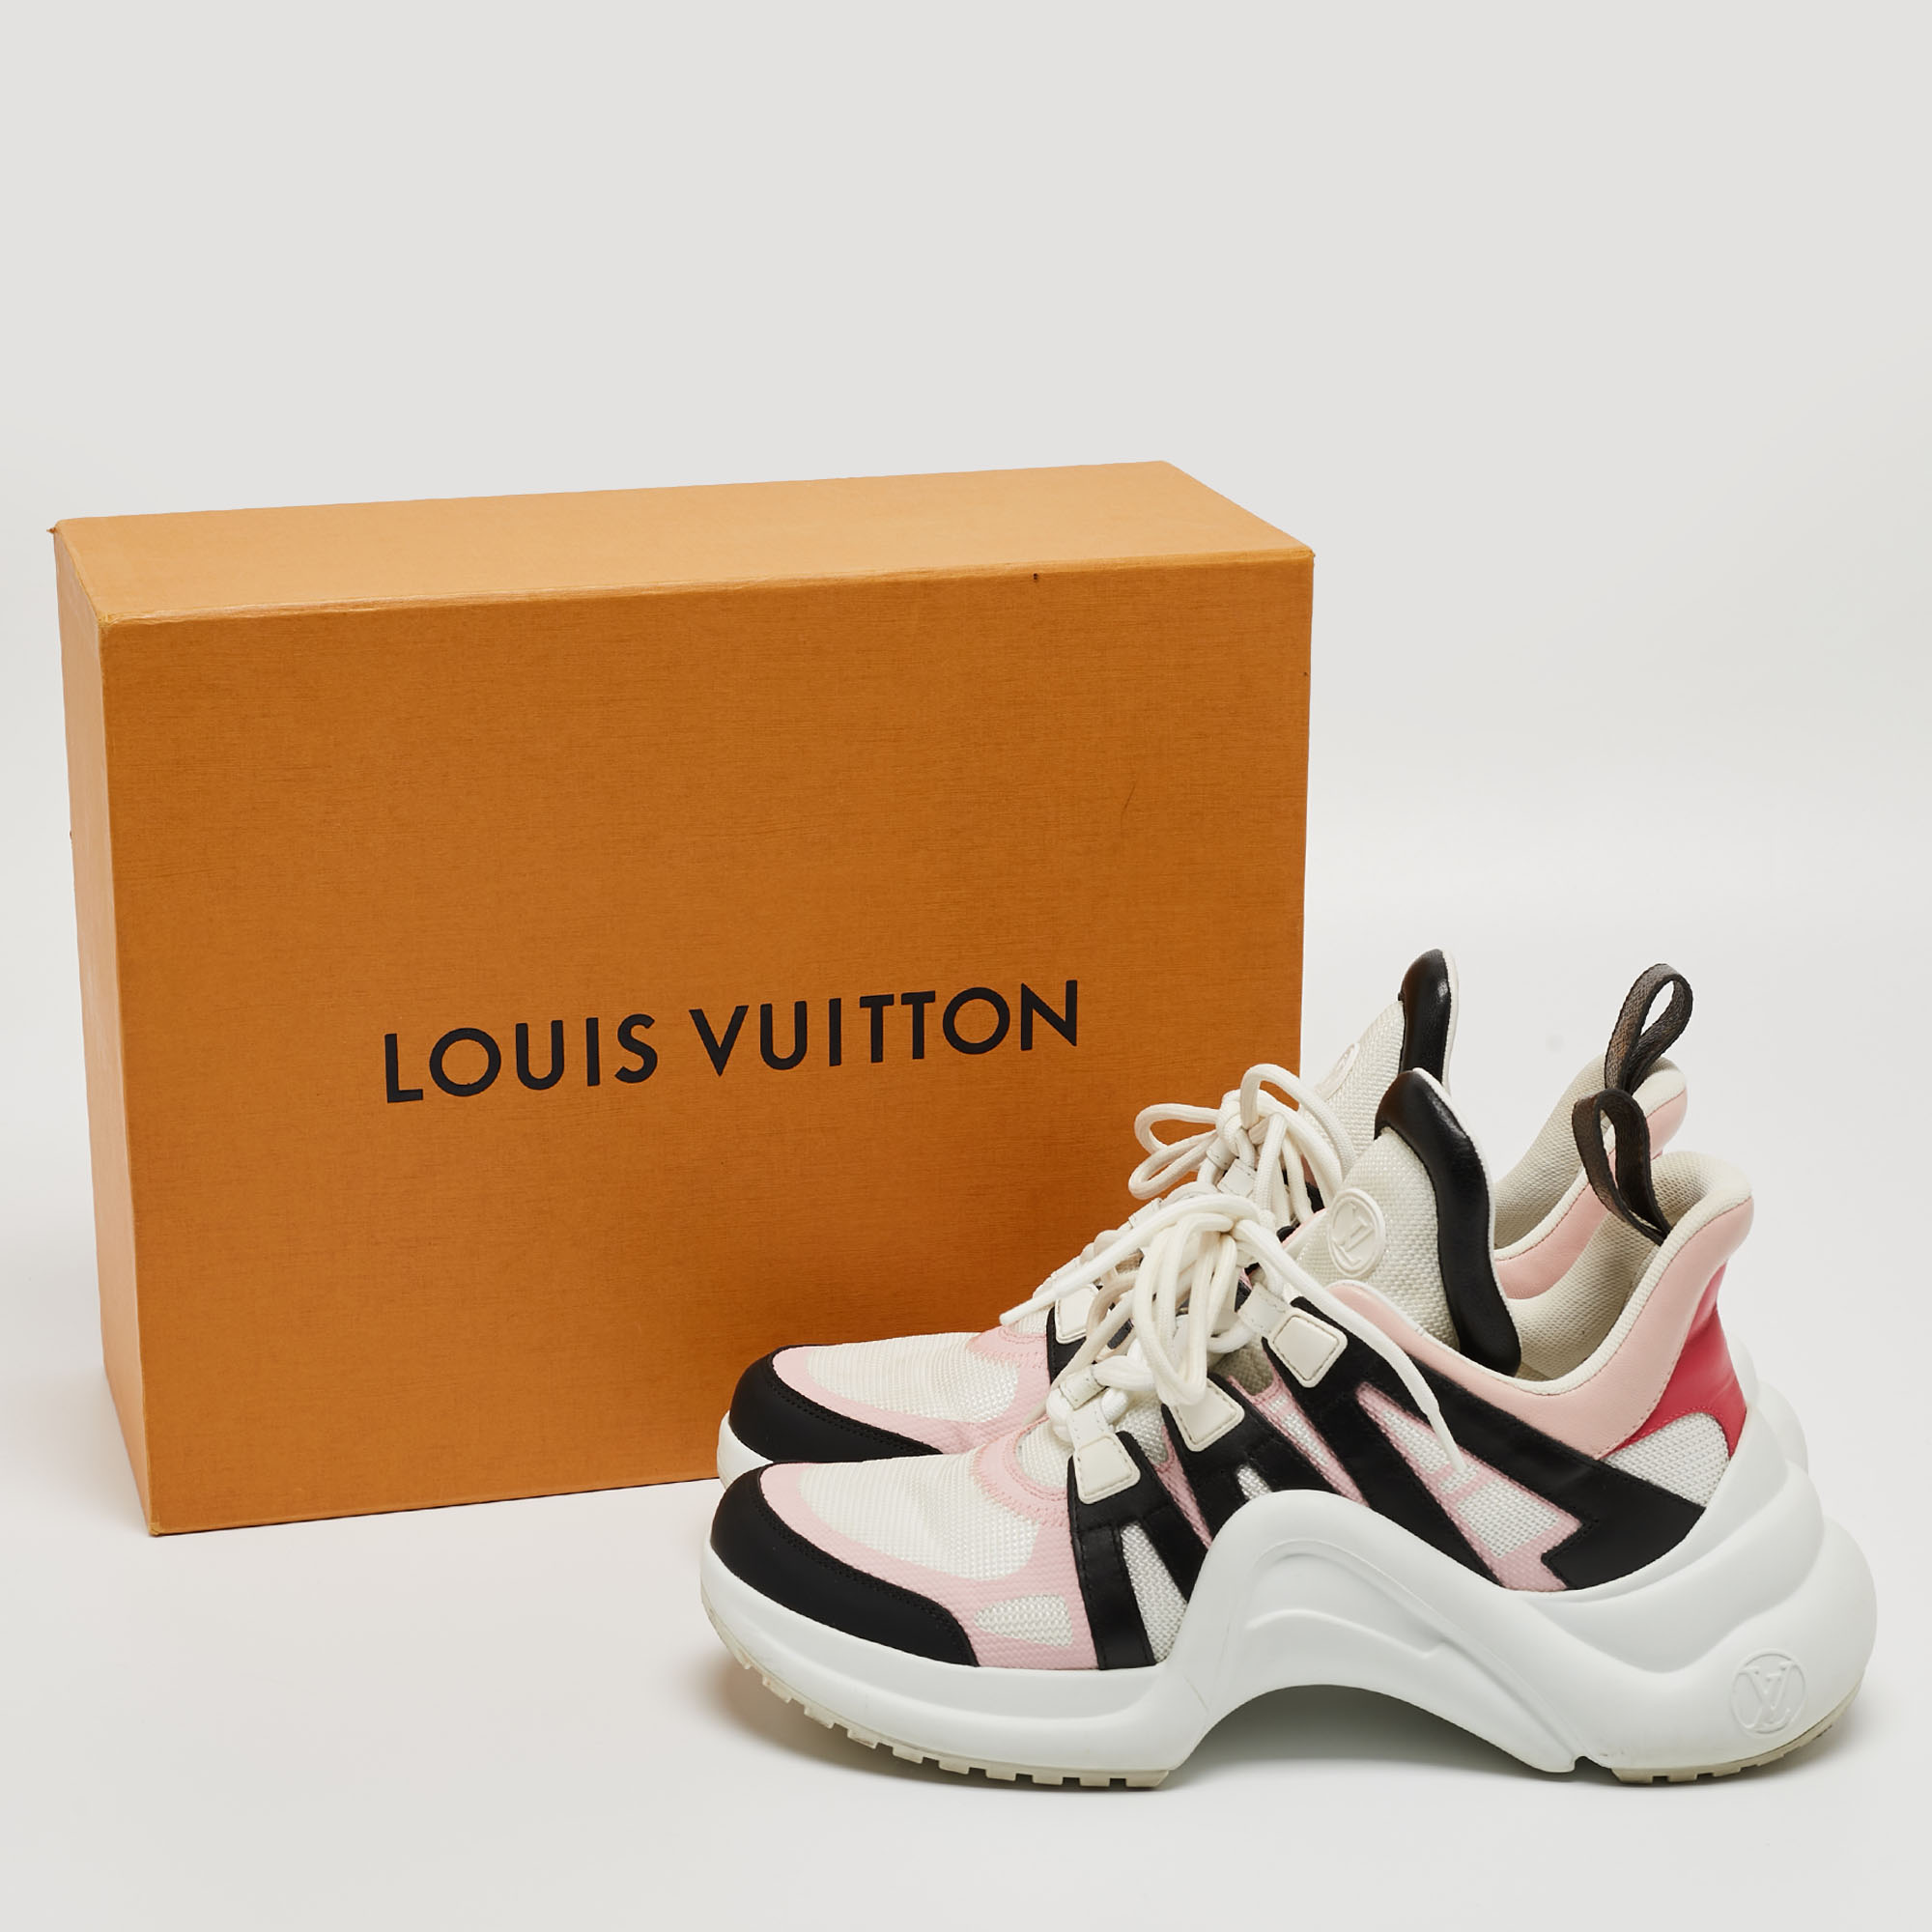 Louis Vuitton Multicolor Leather And Mesh Archlight Sneakers Size 39.5